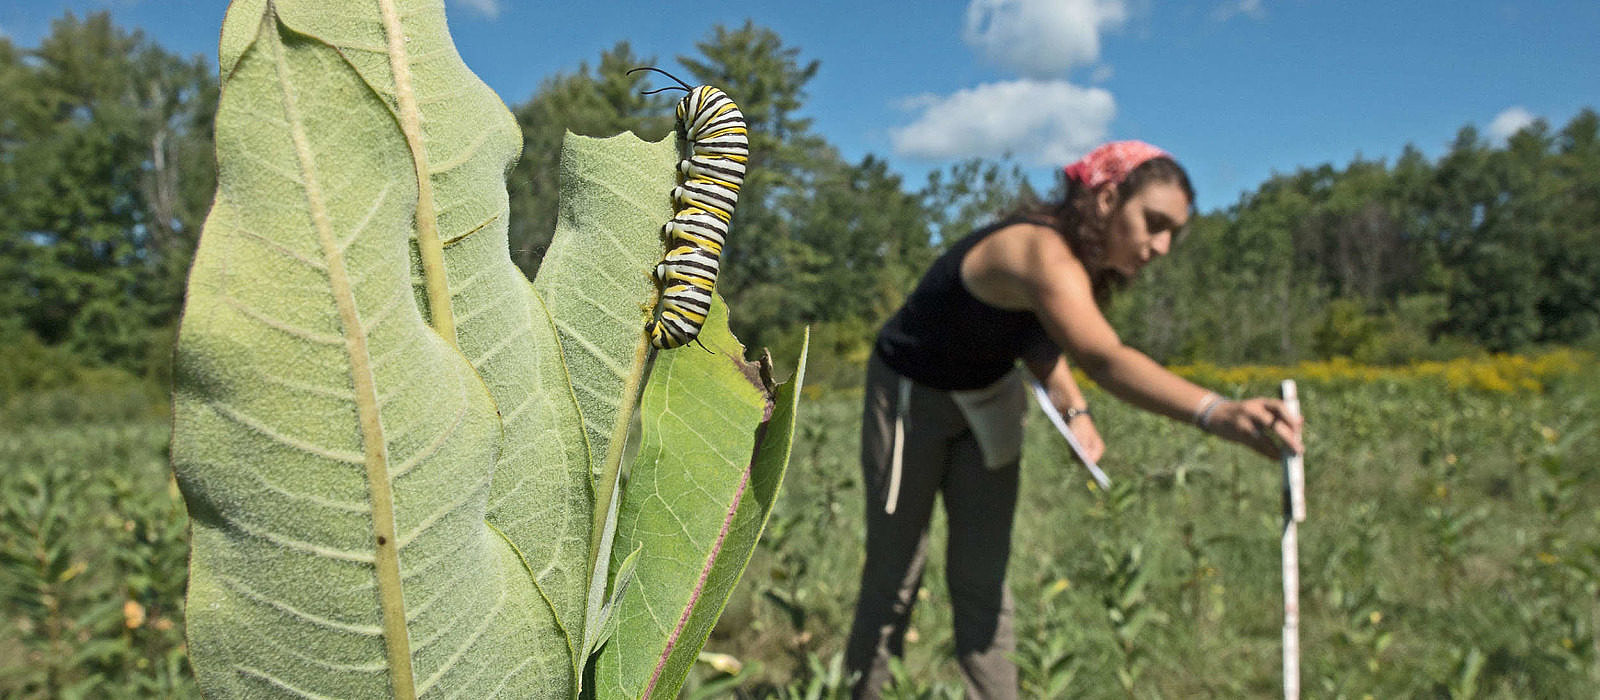 A monarch caterpillar munches away while Katie Valletta takes measurements. (photo © Mark Wilson)